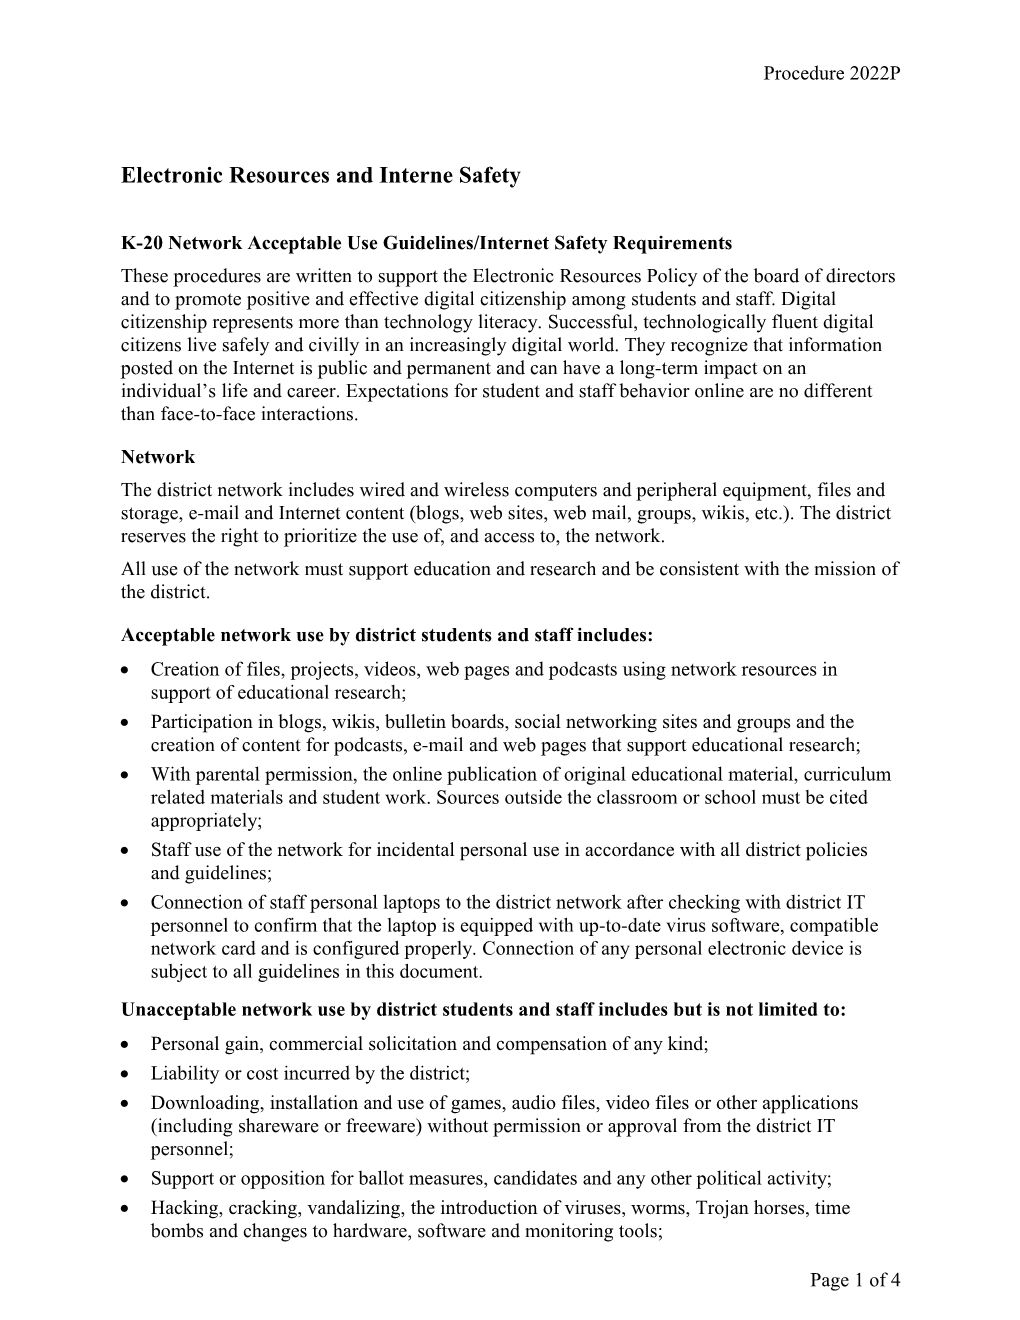 Electronic Resources and Interne Safety